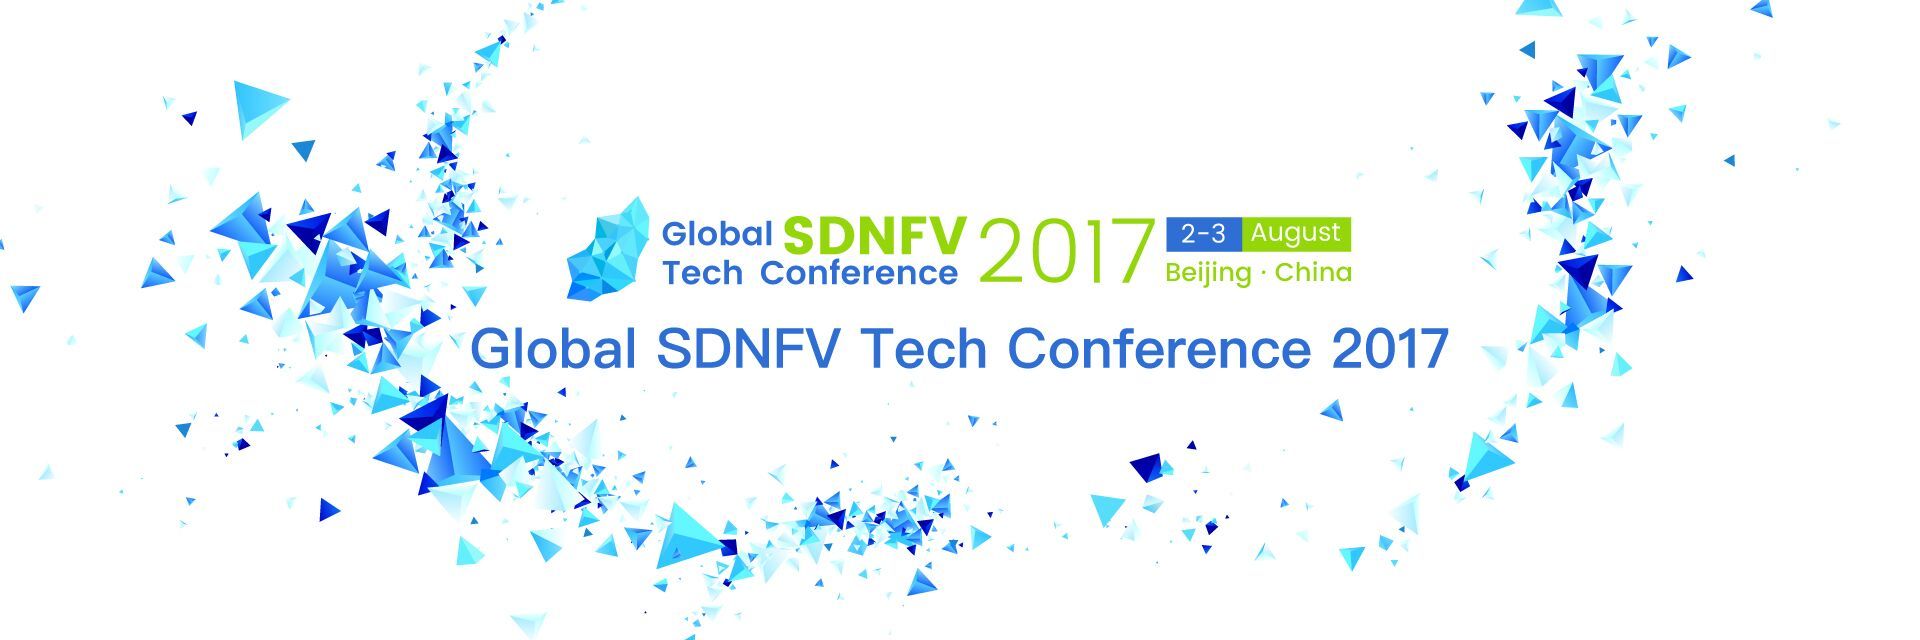 Global SDNFV Tech Conference 2017